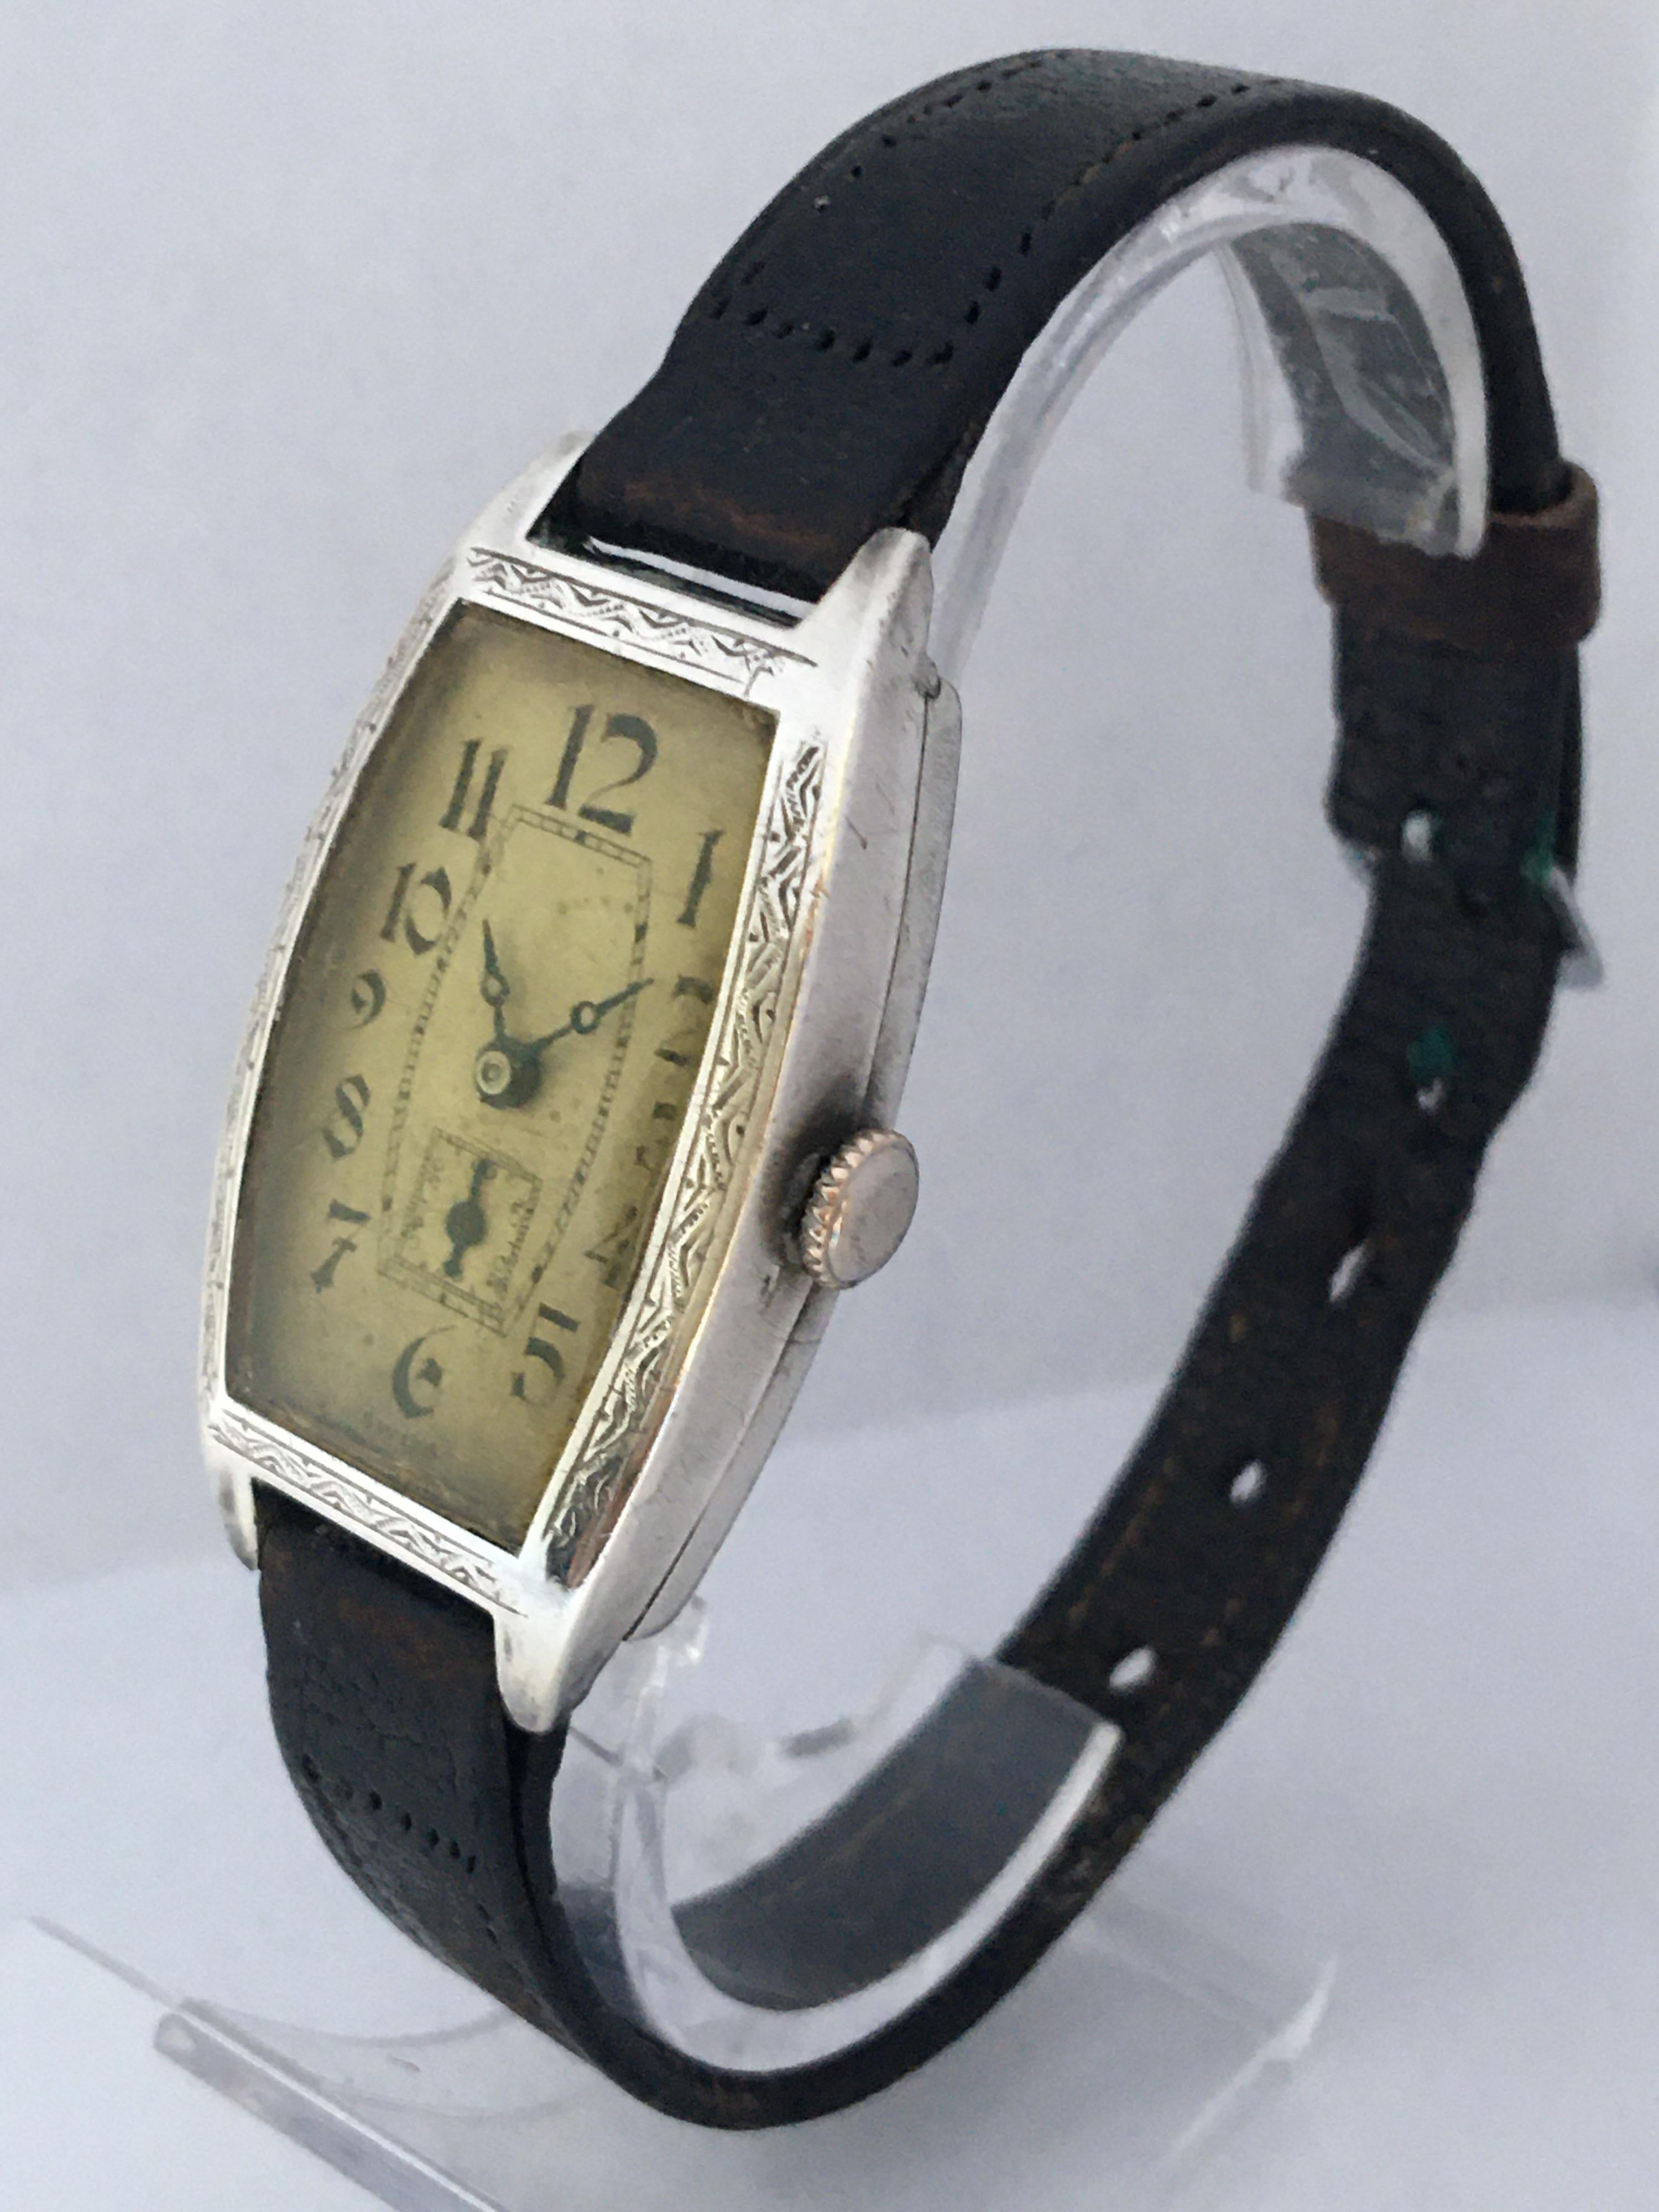 This beautiful pre-owned vintage watch is in good working condition and it is ticking well. Visible signs of ageing and wear with light scratches on the glass and on the silver case. The silvered watch dial is a bit worn. Some small dents on the